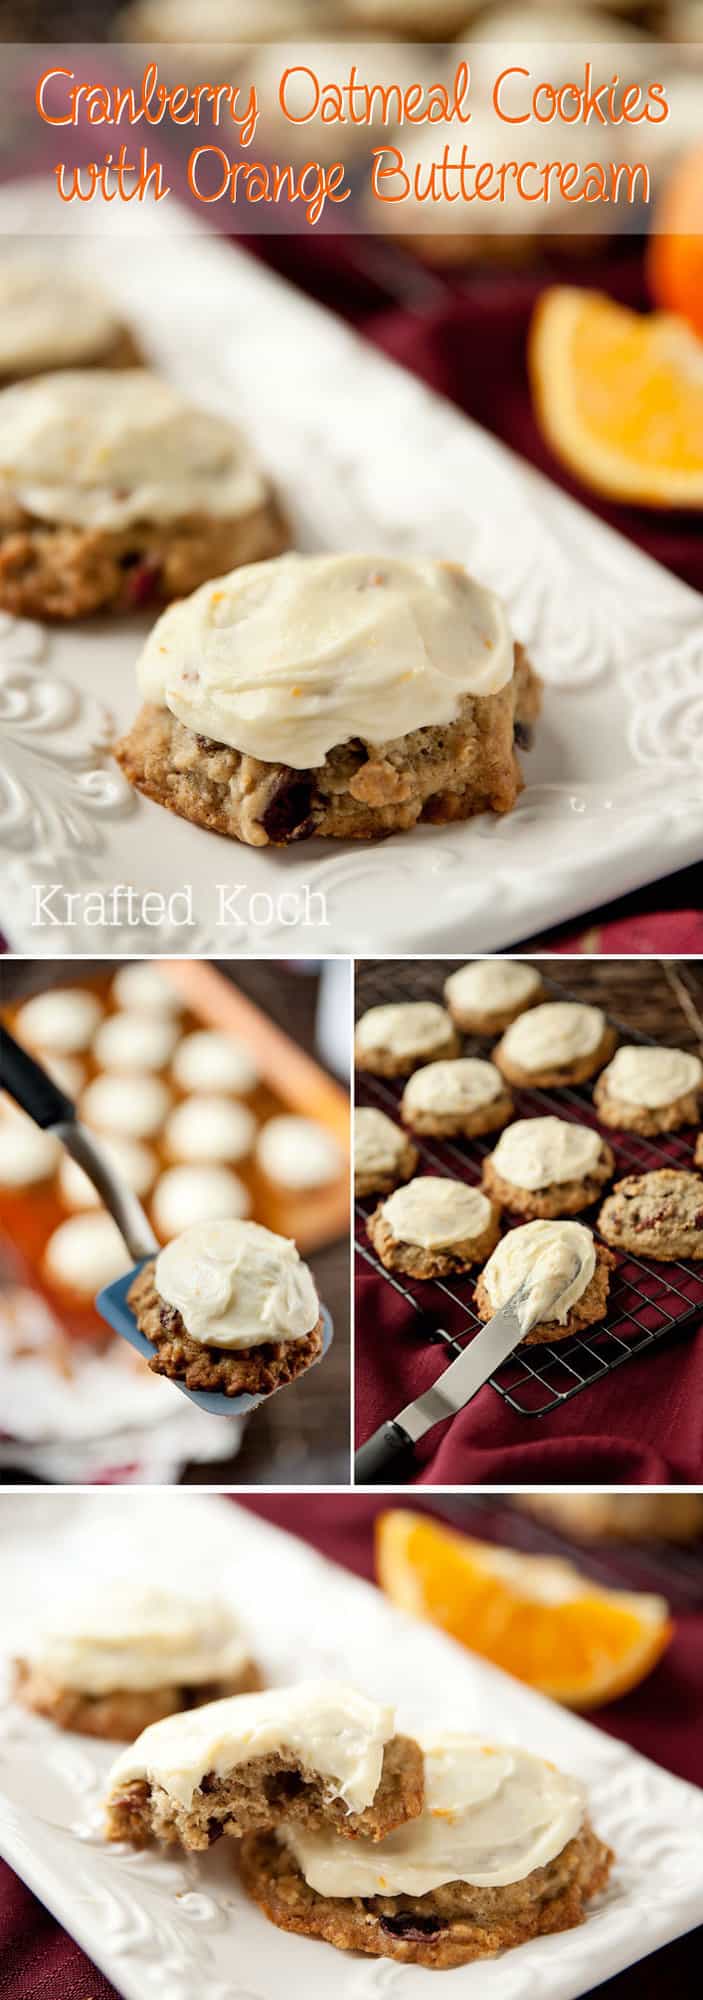 Cranberry Oatmeal Cookies with Orange Buttercream - Krafted Koch - A moist and flavorful cookie recipe that is perfect for fall!